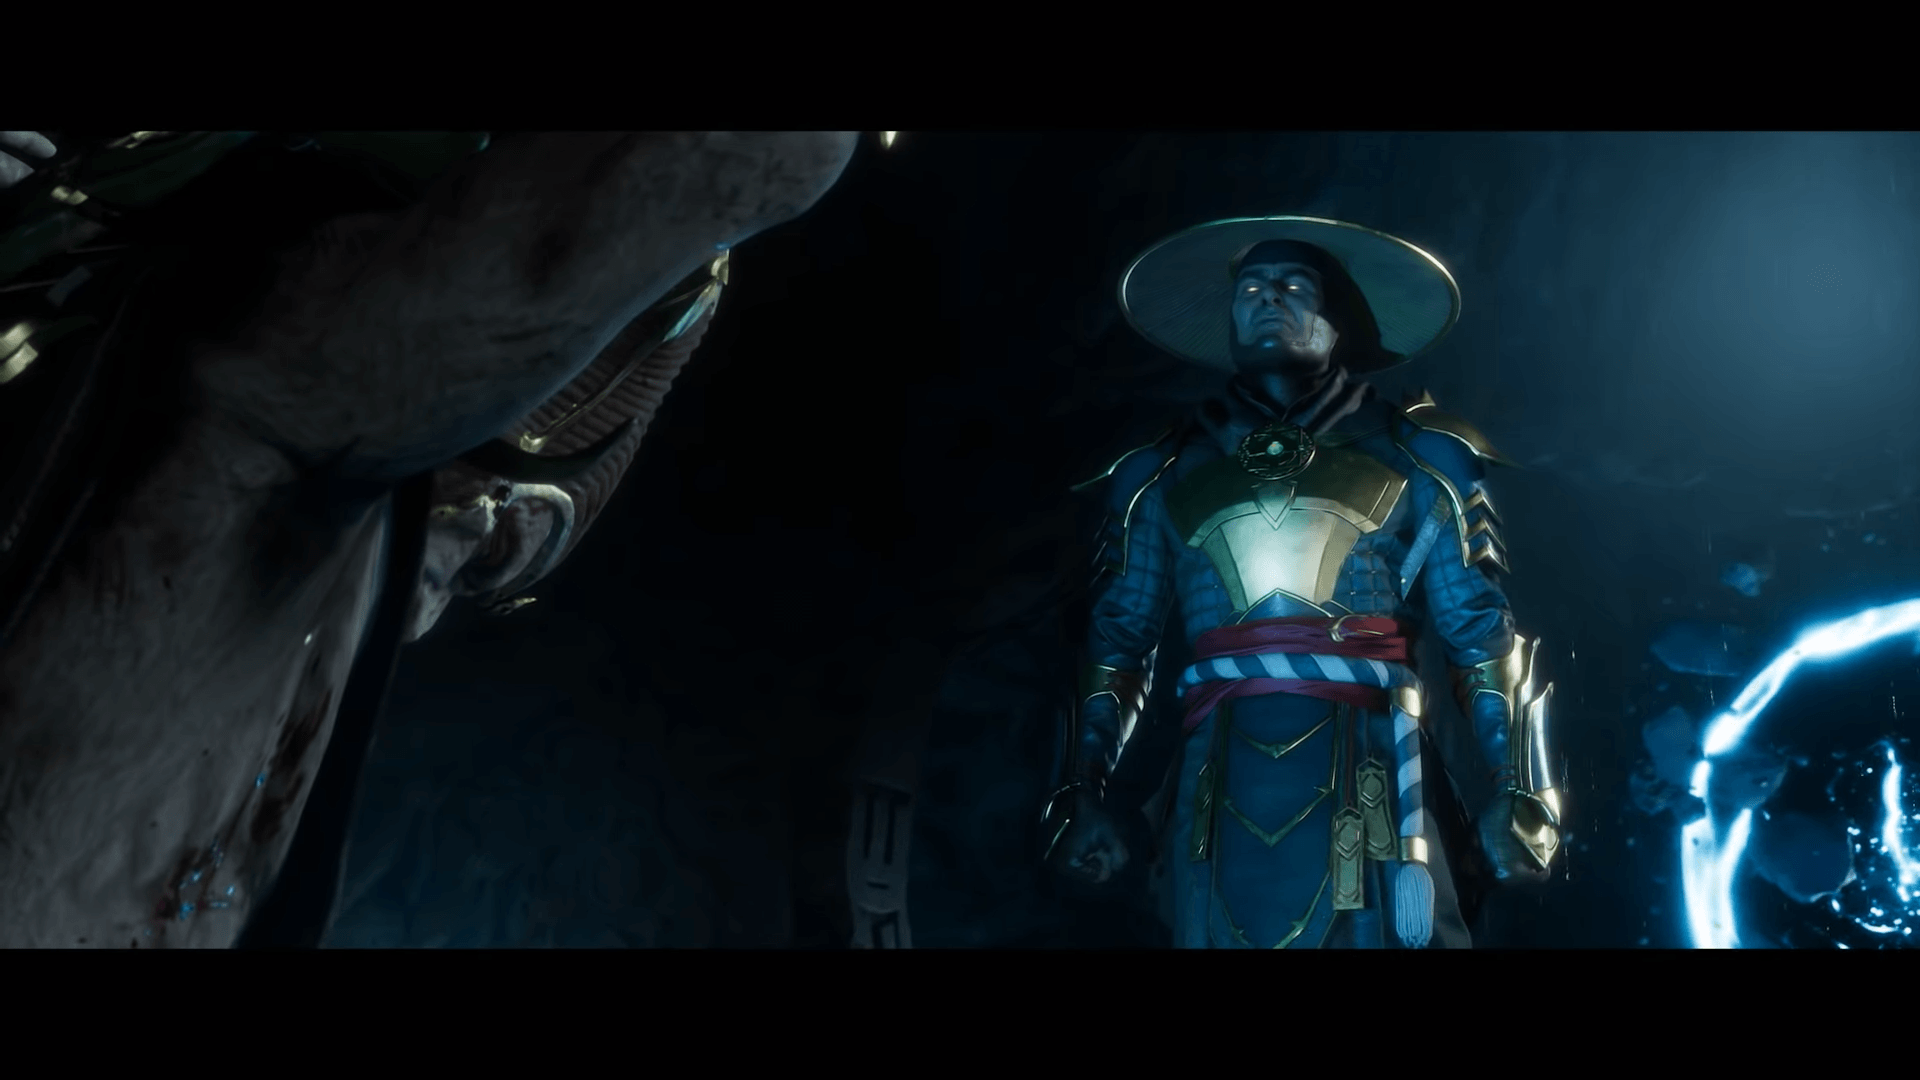 Mortal Kombat 11: What to expect from the Story Mode